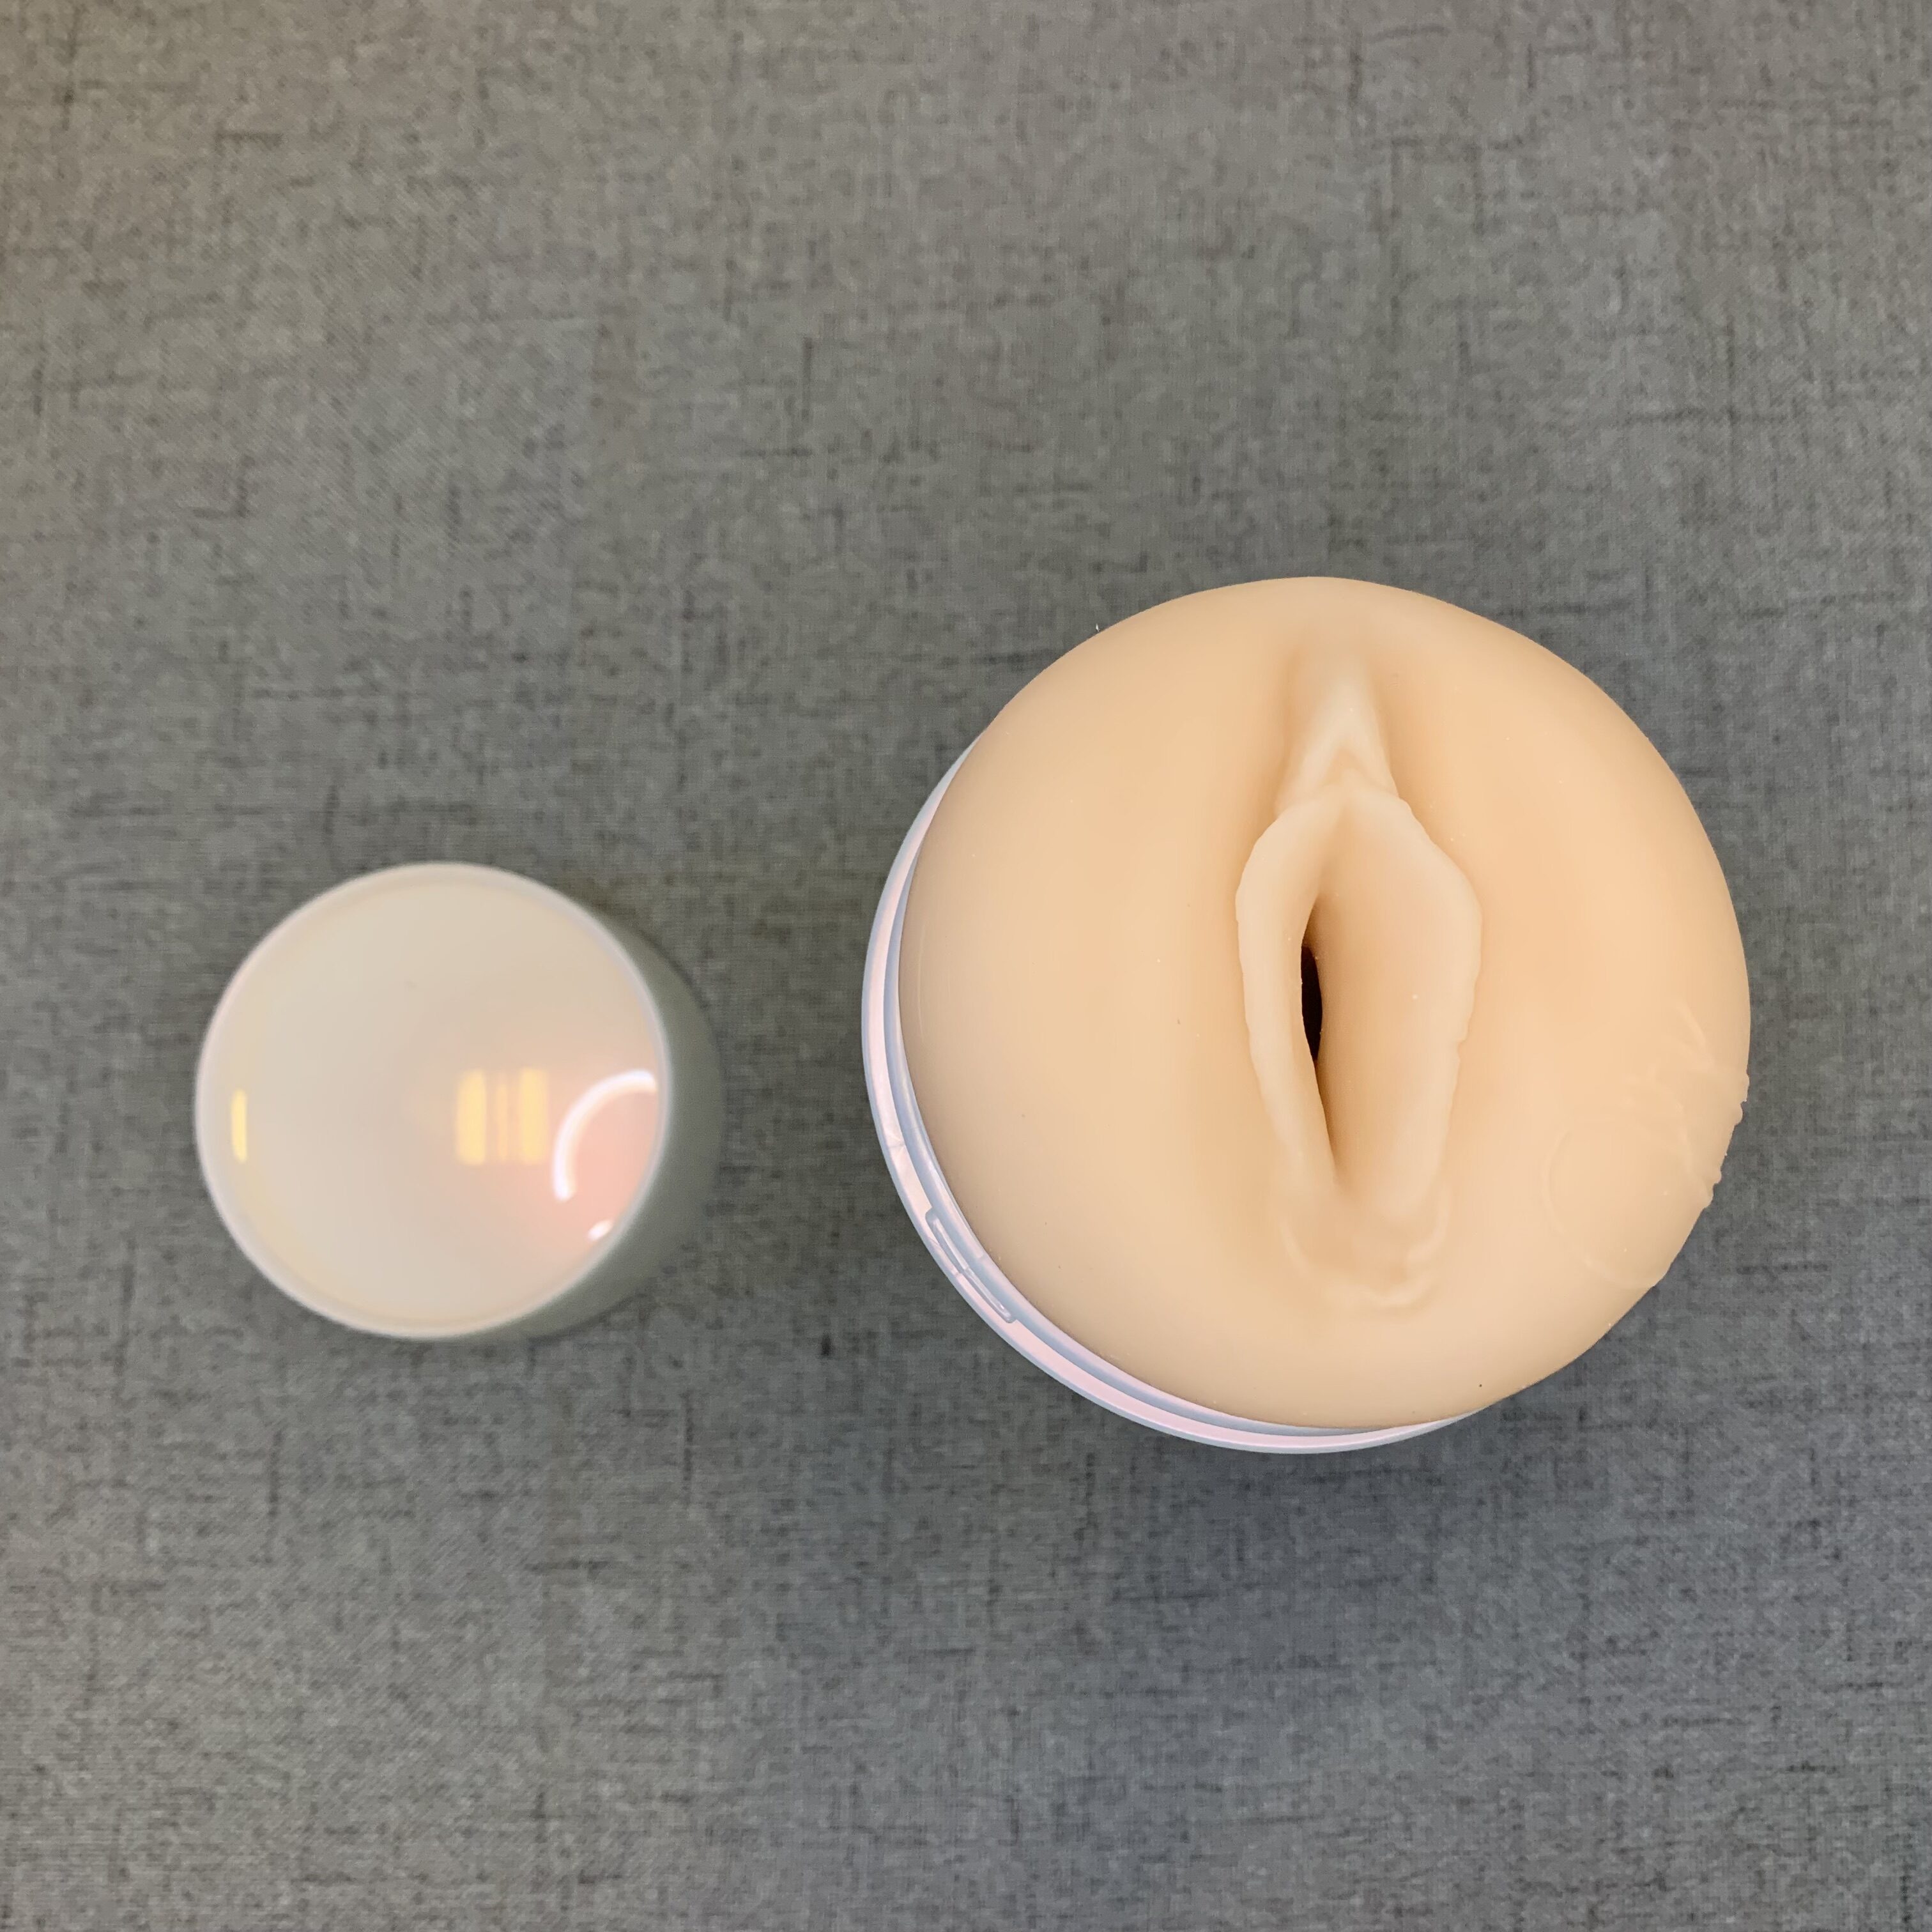 Jenna Haze Fleshlight Obsession Special feature